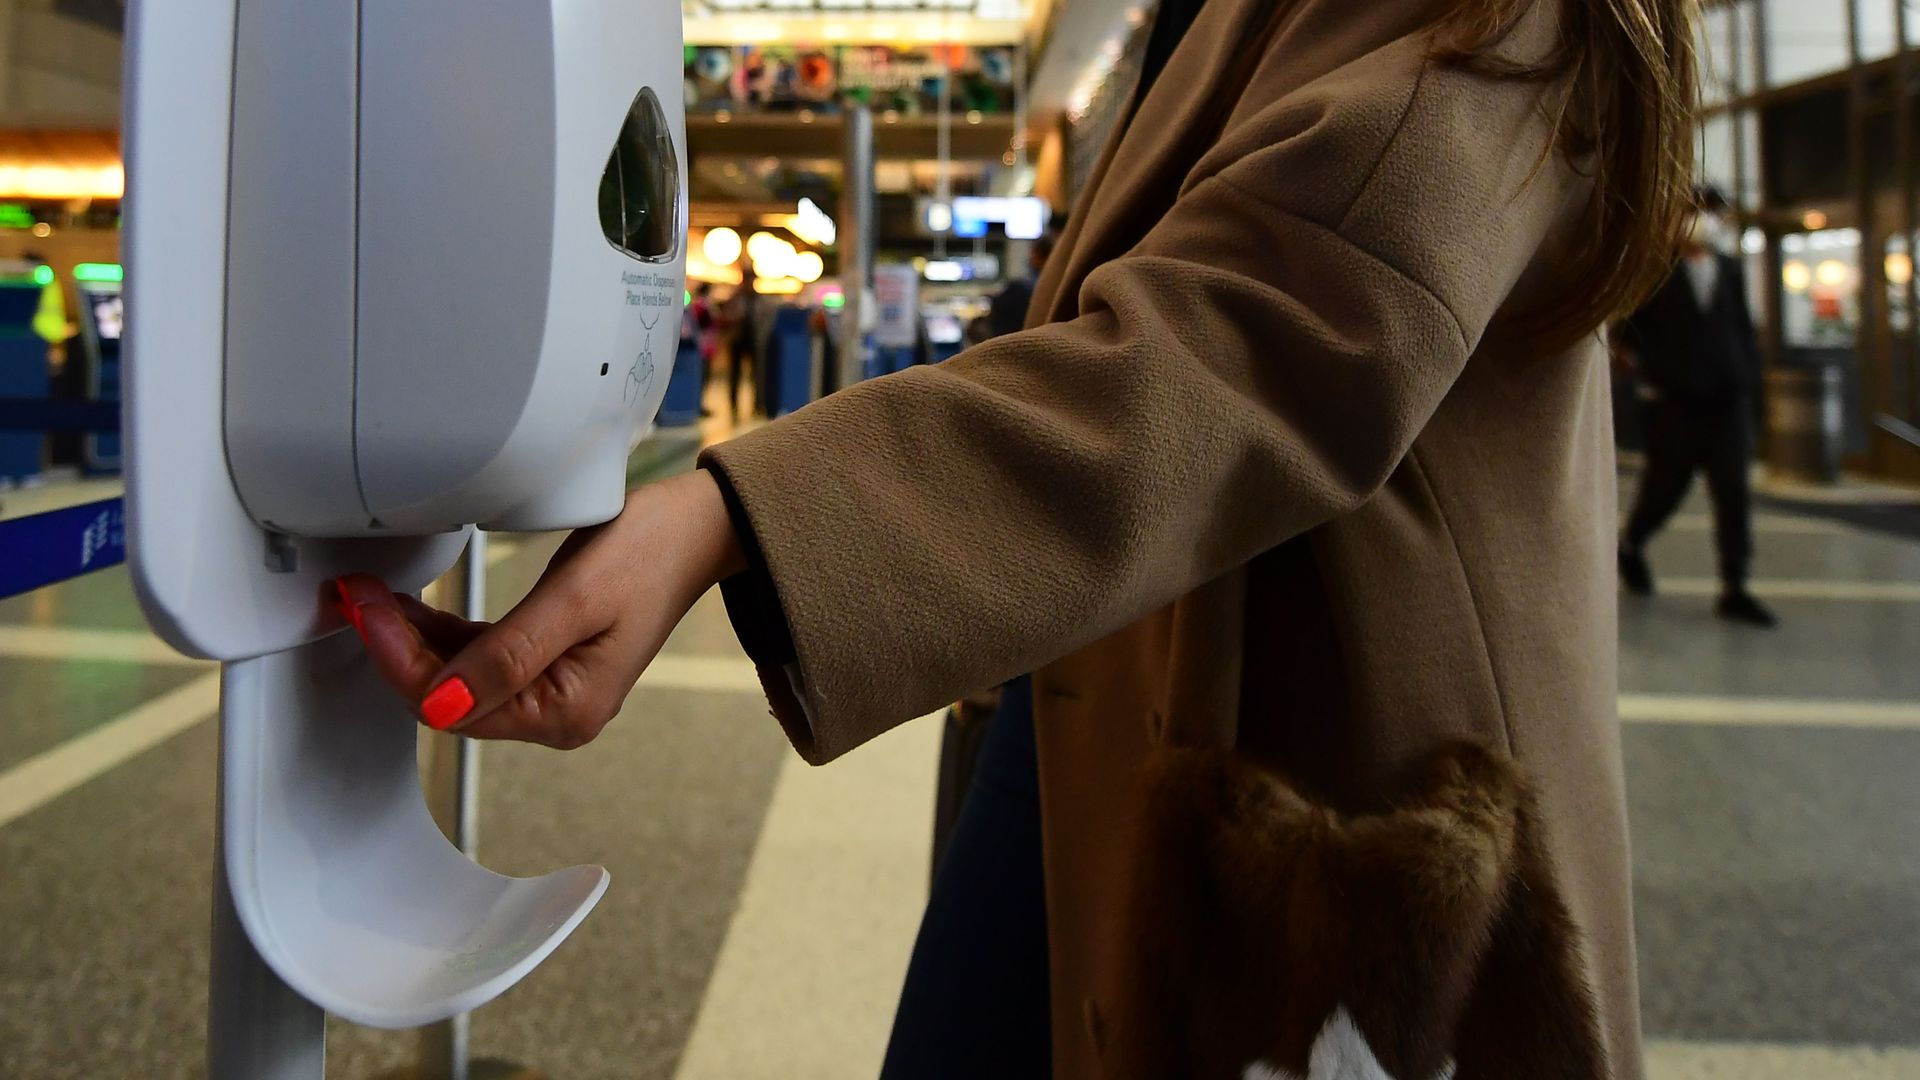 A woman uses hand sanitizer at Los Angeles International Airport